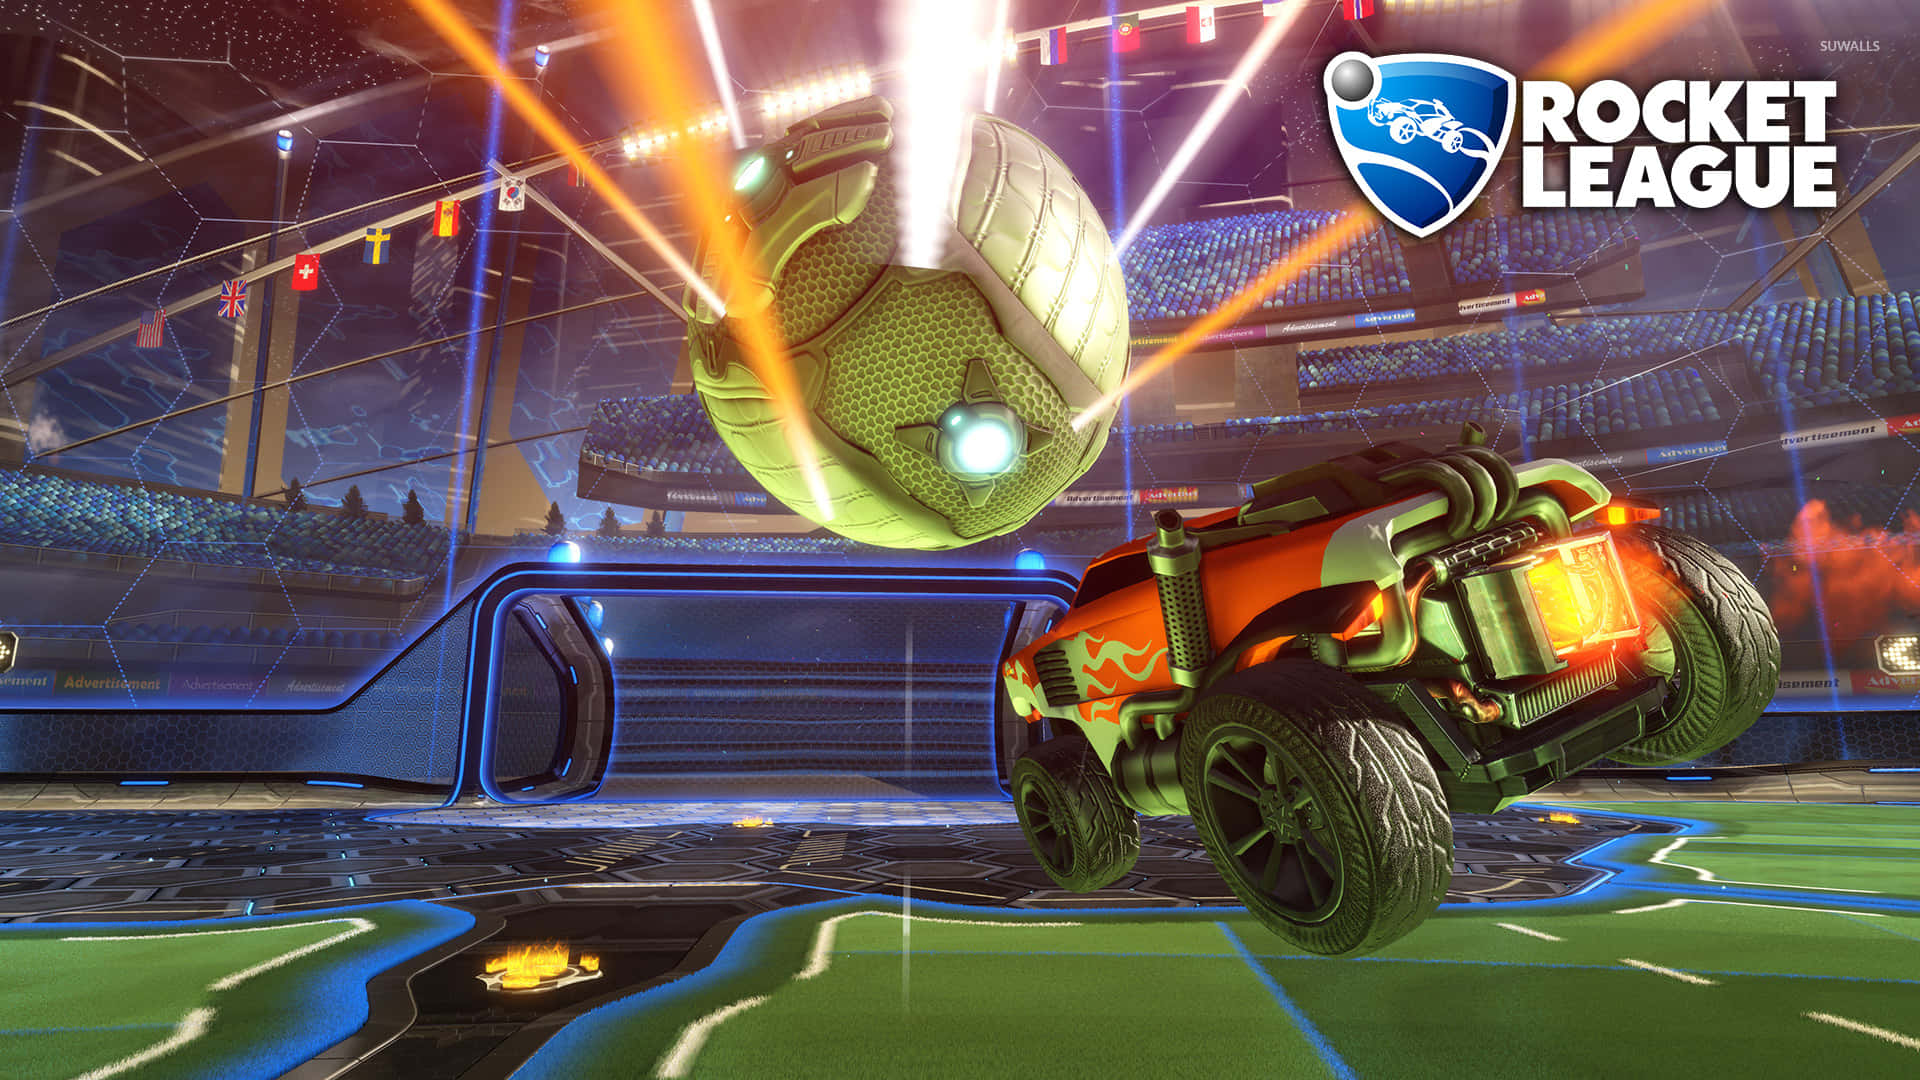 Light up the night with 'Rocket League'